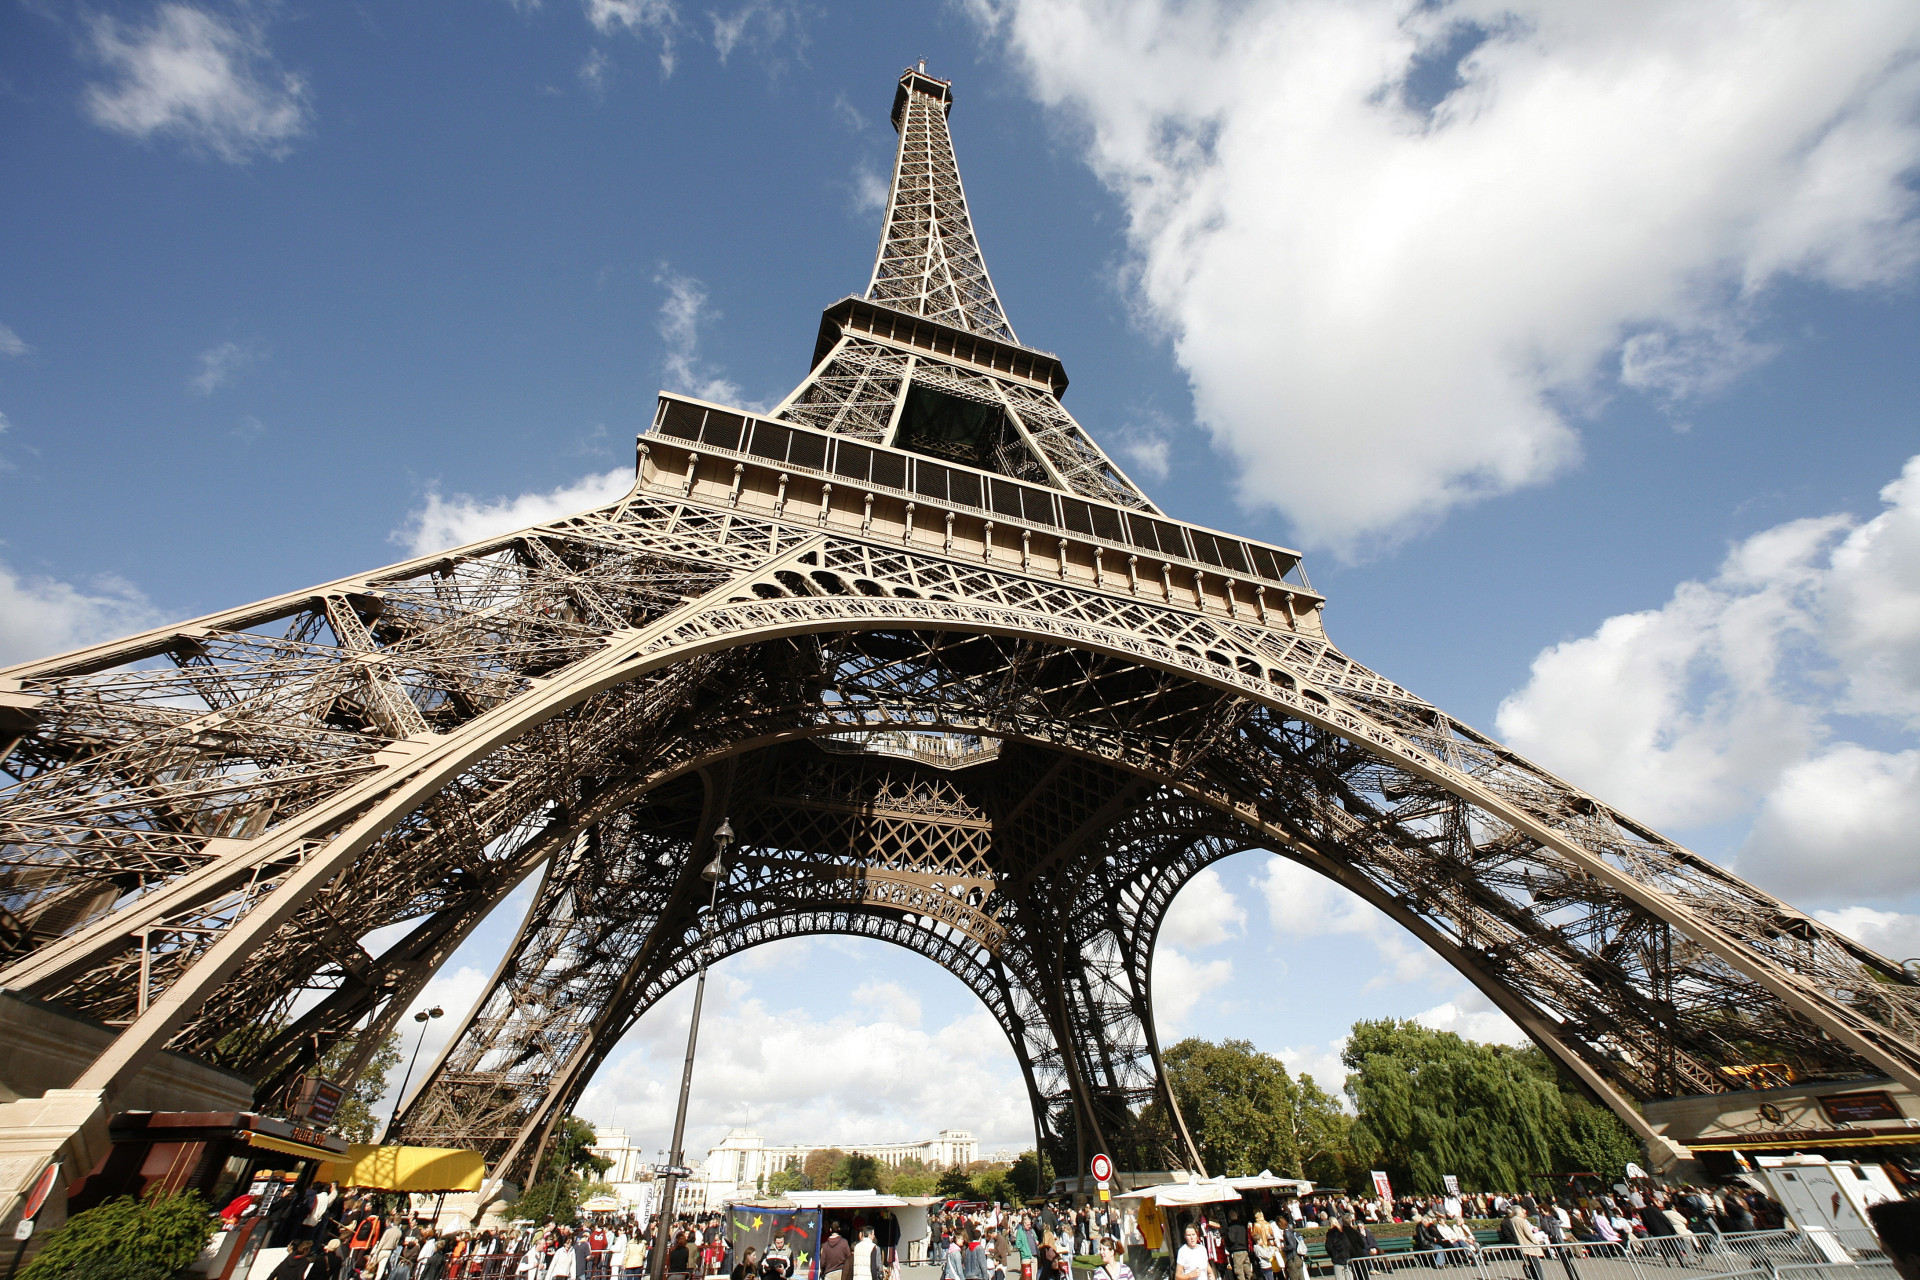 It's estimated that the Eiffel Tower gets an annual number of seven million <a href="https://www.starsinsider.com/travel/419537/visitor-attractions-closed-abandoned-or-overrun-by-tourists" rel="noopener">visitors</a> from all over the world.<p><a href="https://www.msn.com/en-us/community/channel/vid-7xx8mnucu55yw63we9va2gwr7uihbxwc68fxqp25x6tg4ftibpra?cvid=94631541bc0f4f89bfd59158d696ad7e">Follow us and access great exclusive content every day</a></p>